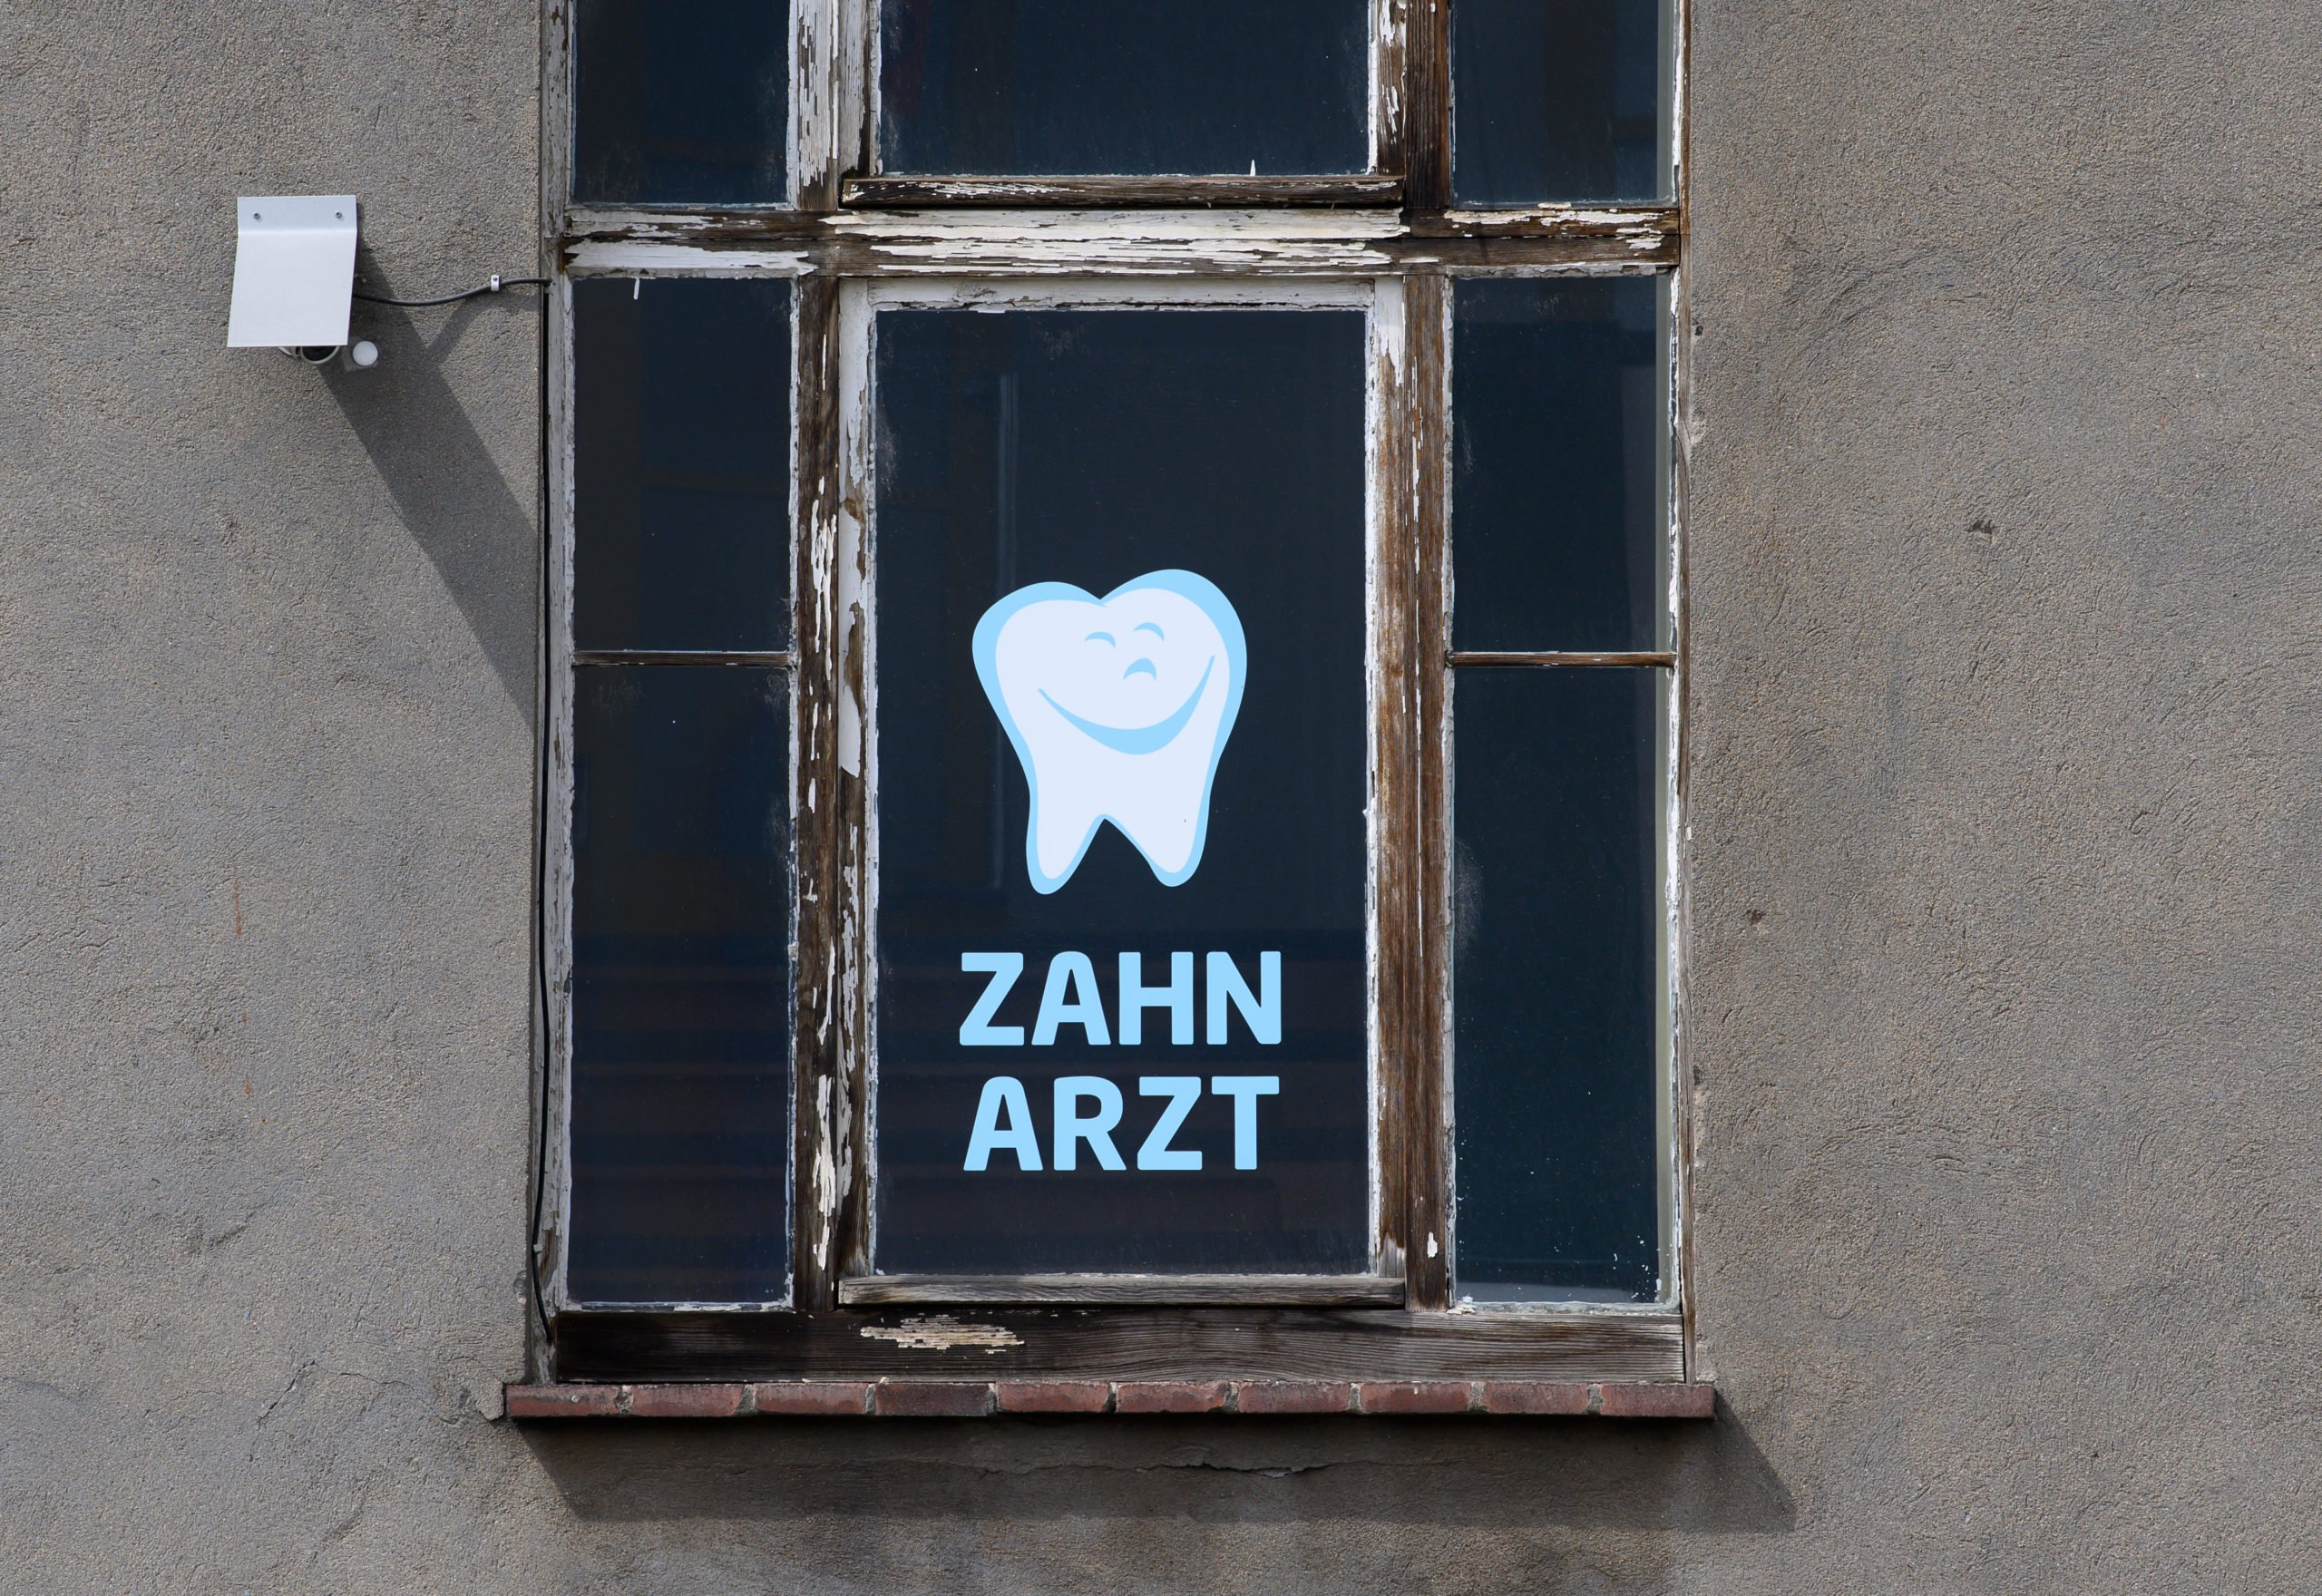 A sign for a dentist's practice in Dresden, Saxony